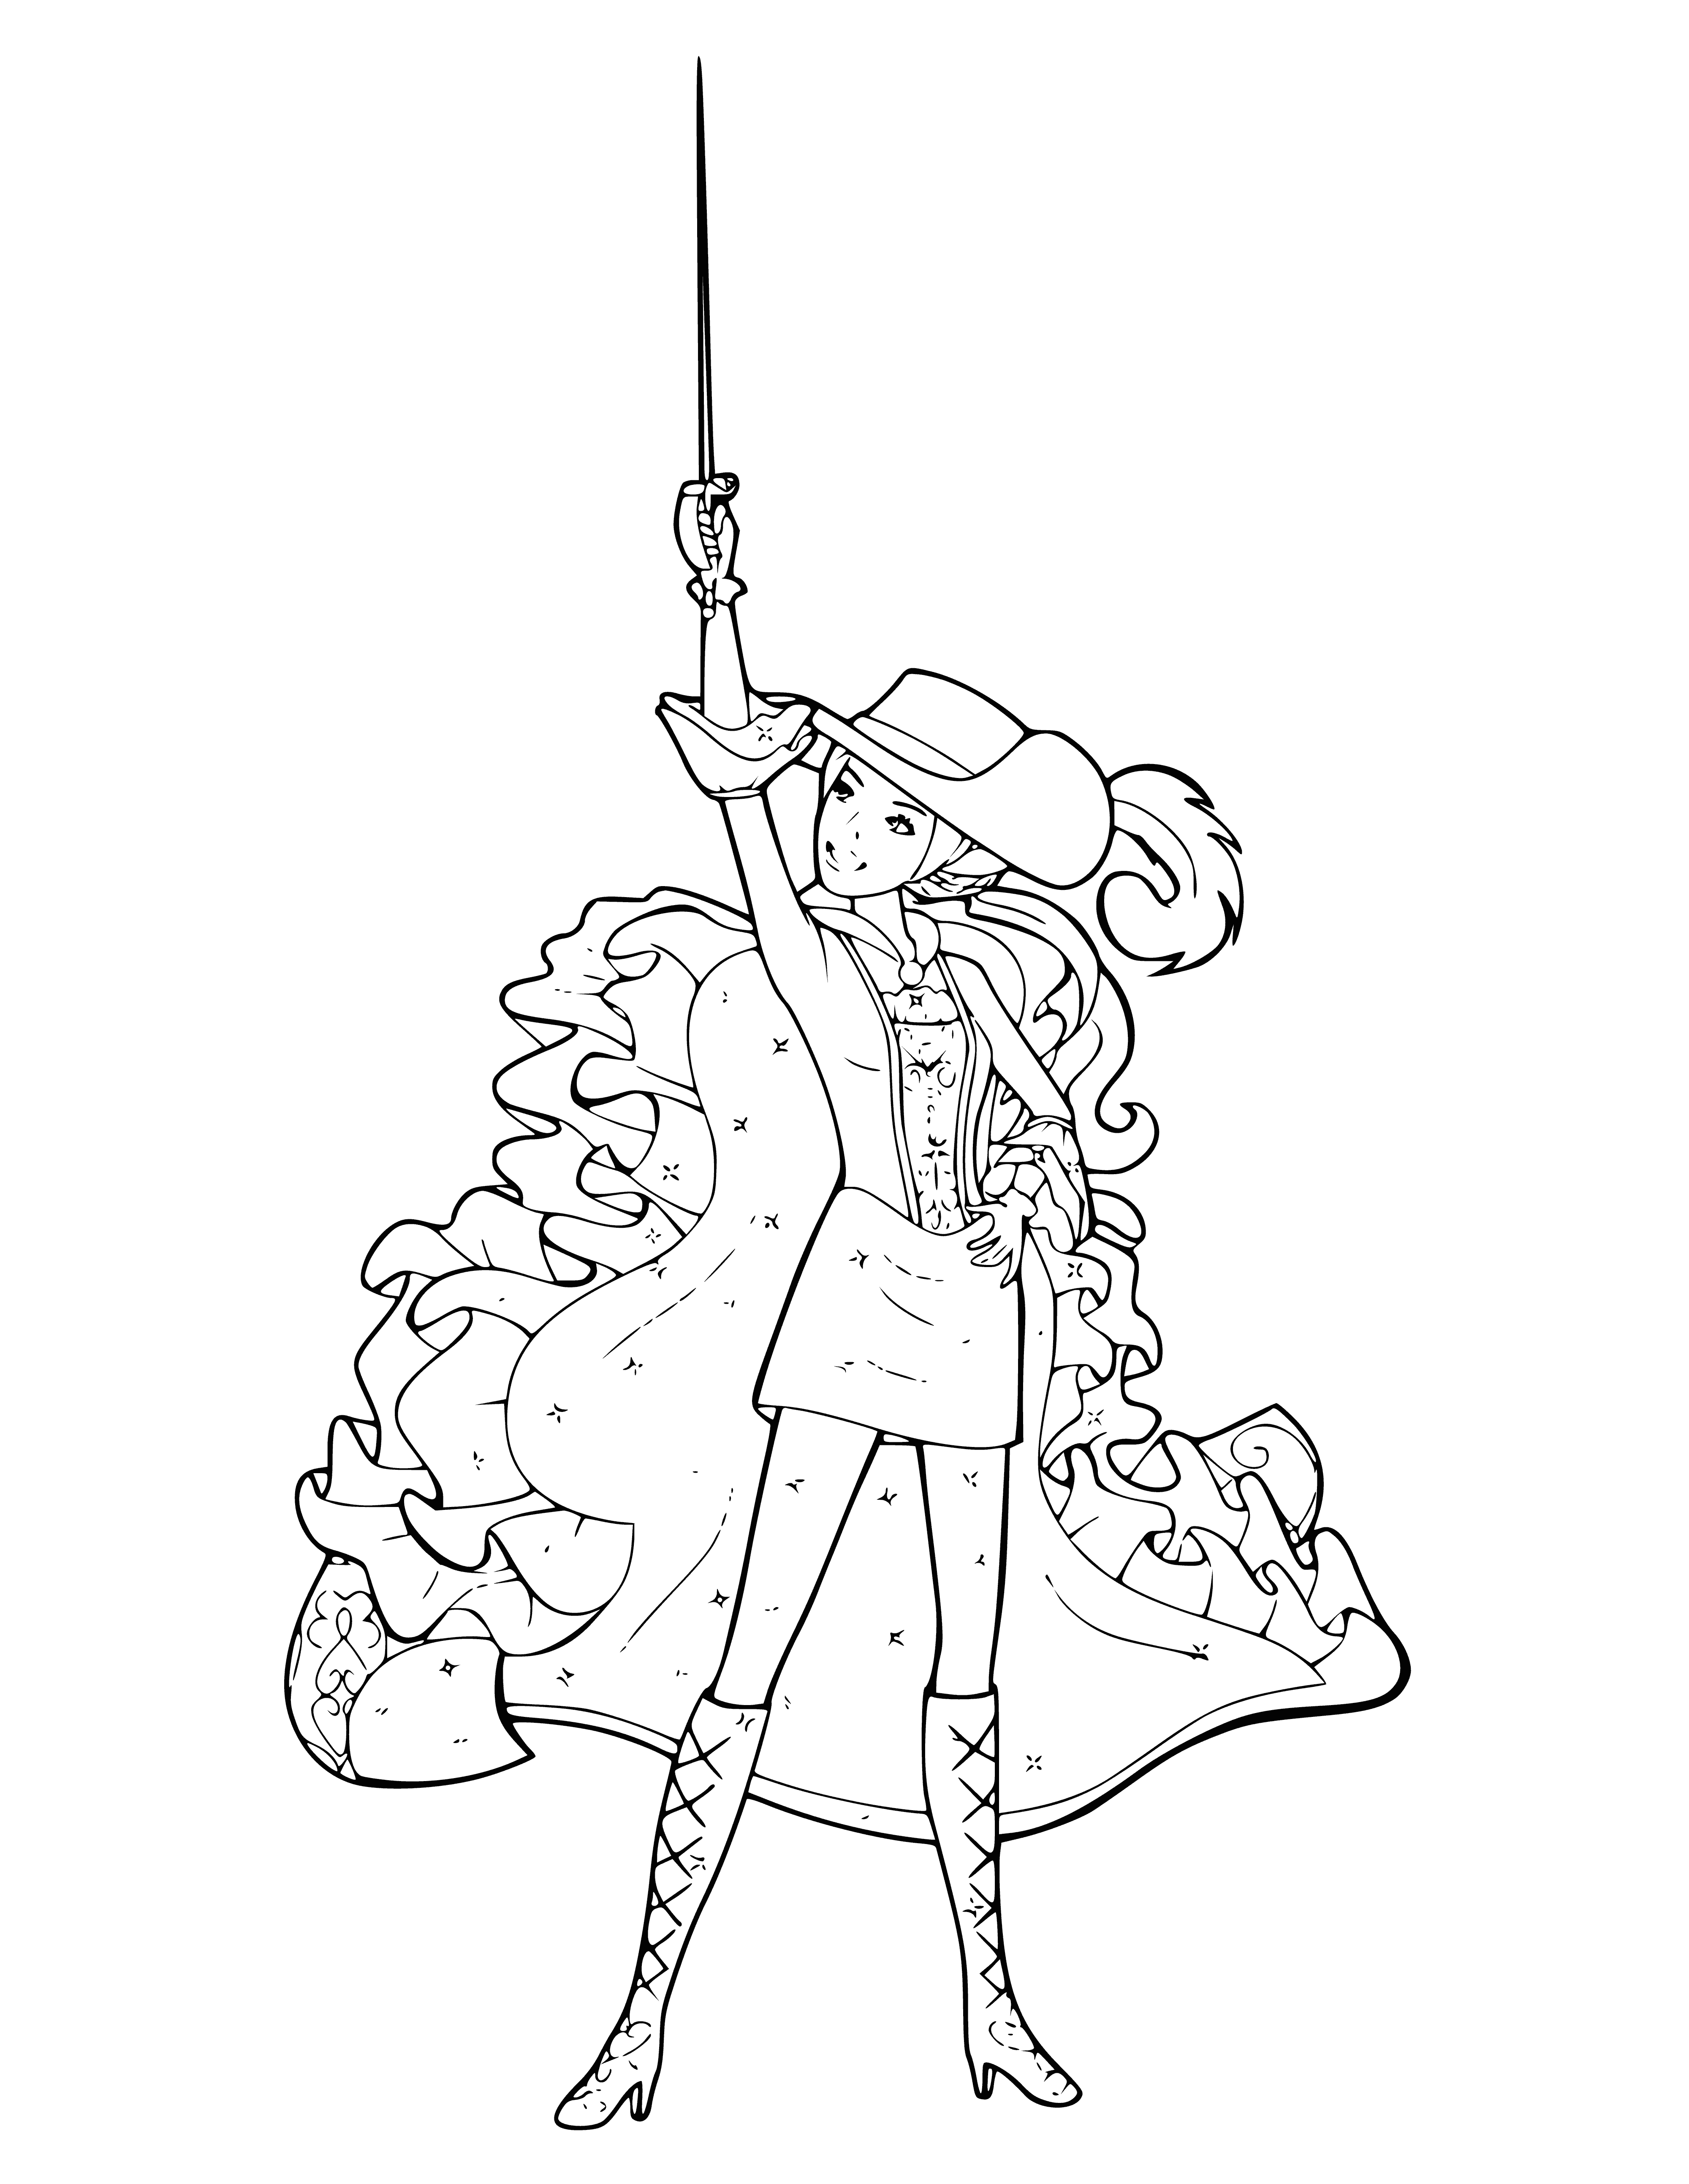 coloring page: Barbie Musketeer has a blue sword and red cape and looks ready to fight for justice. #barbie